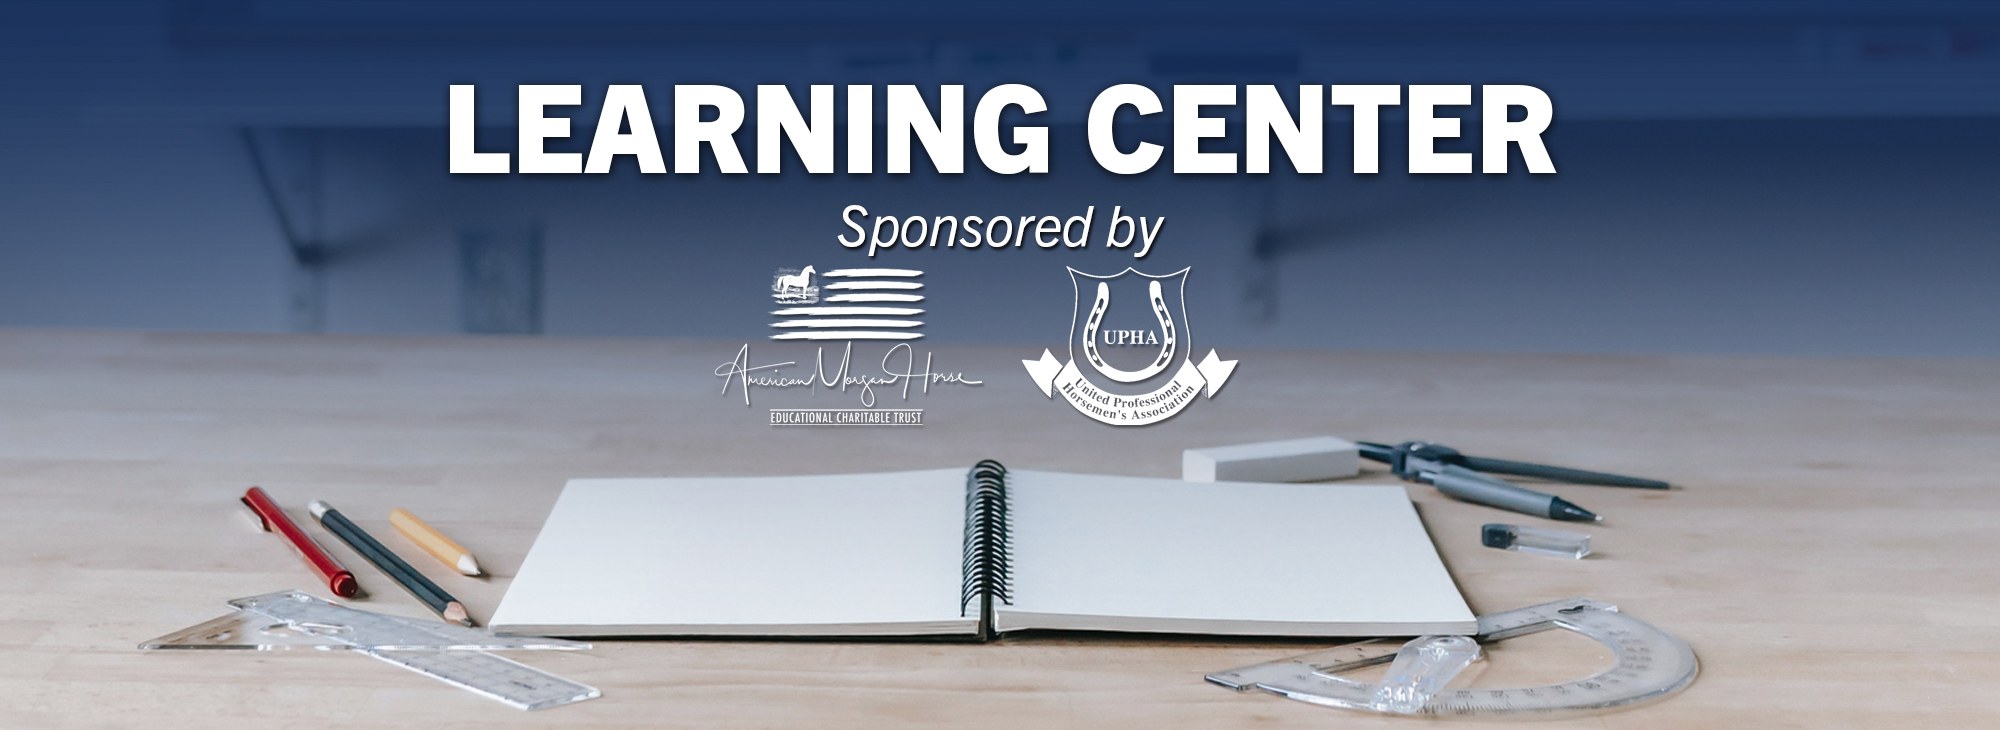 Learning Center Image